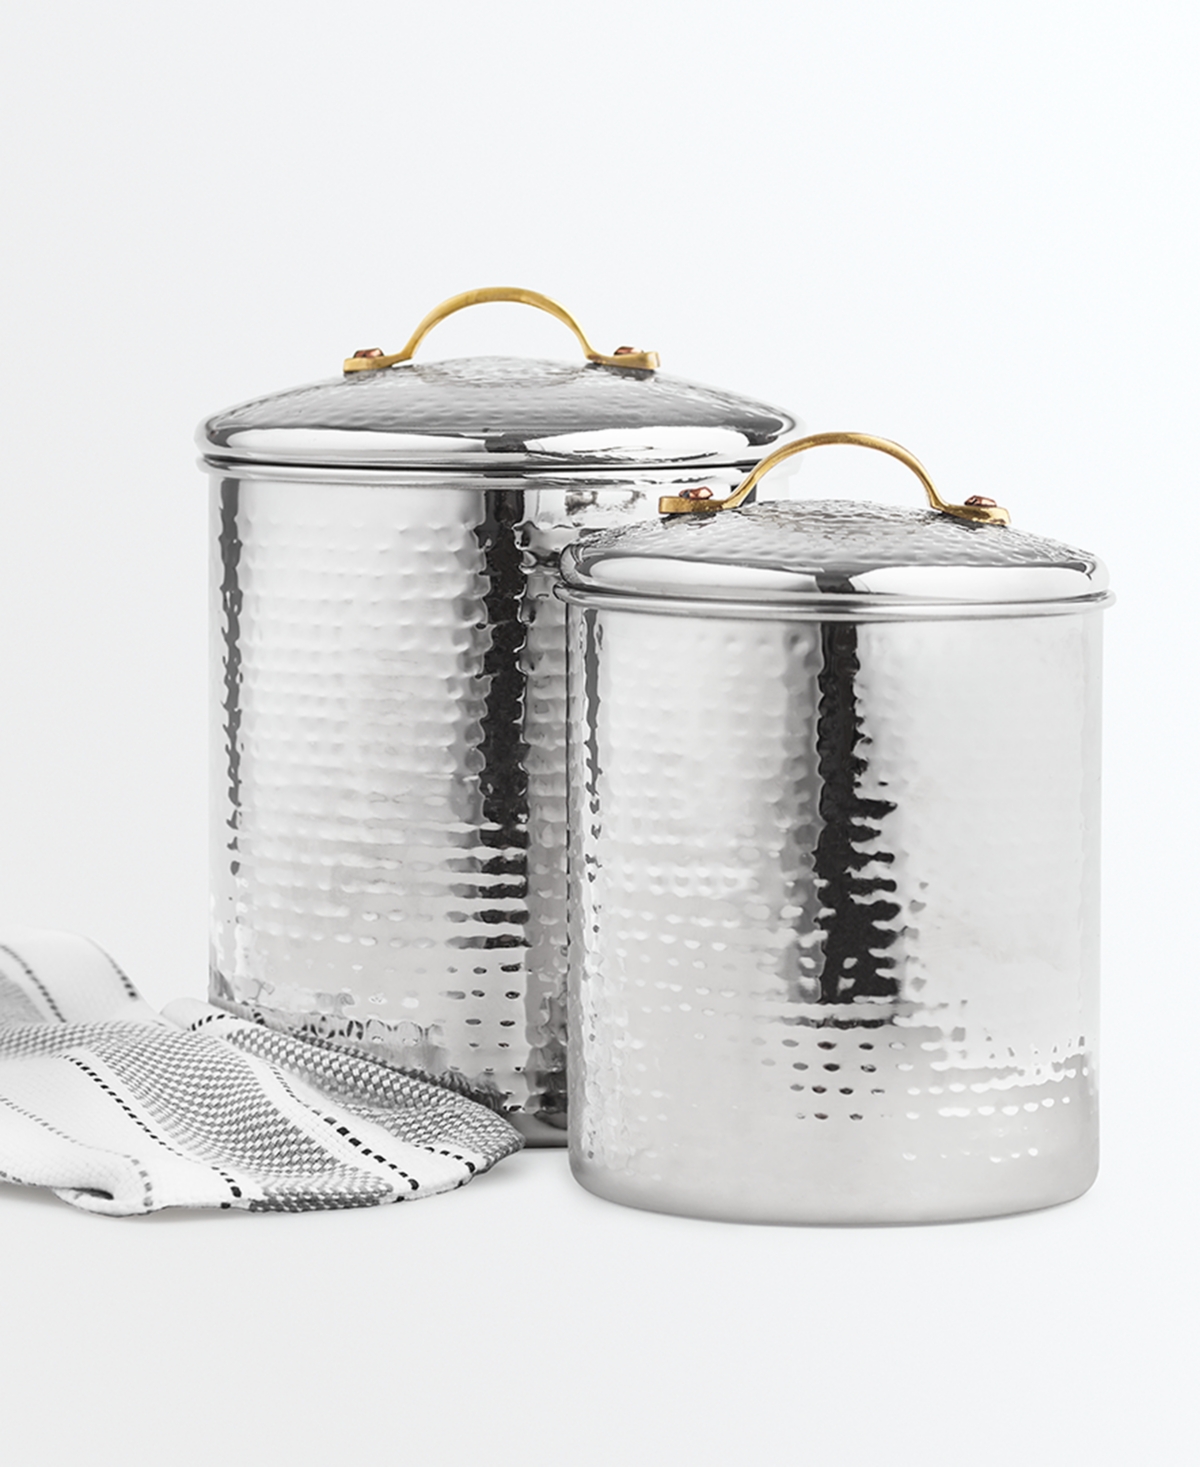 Martha Stewart Collection Hammered Stainless Steel Canisters, Set of 2, Created for Macy's